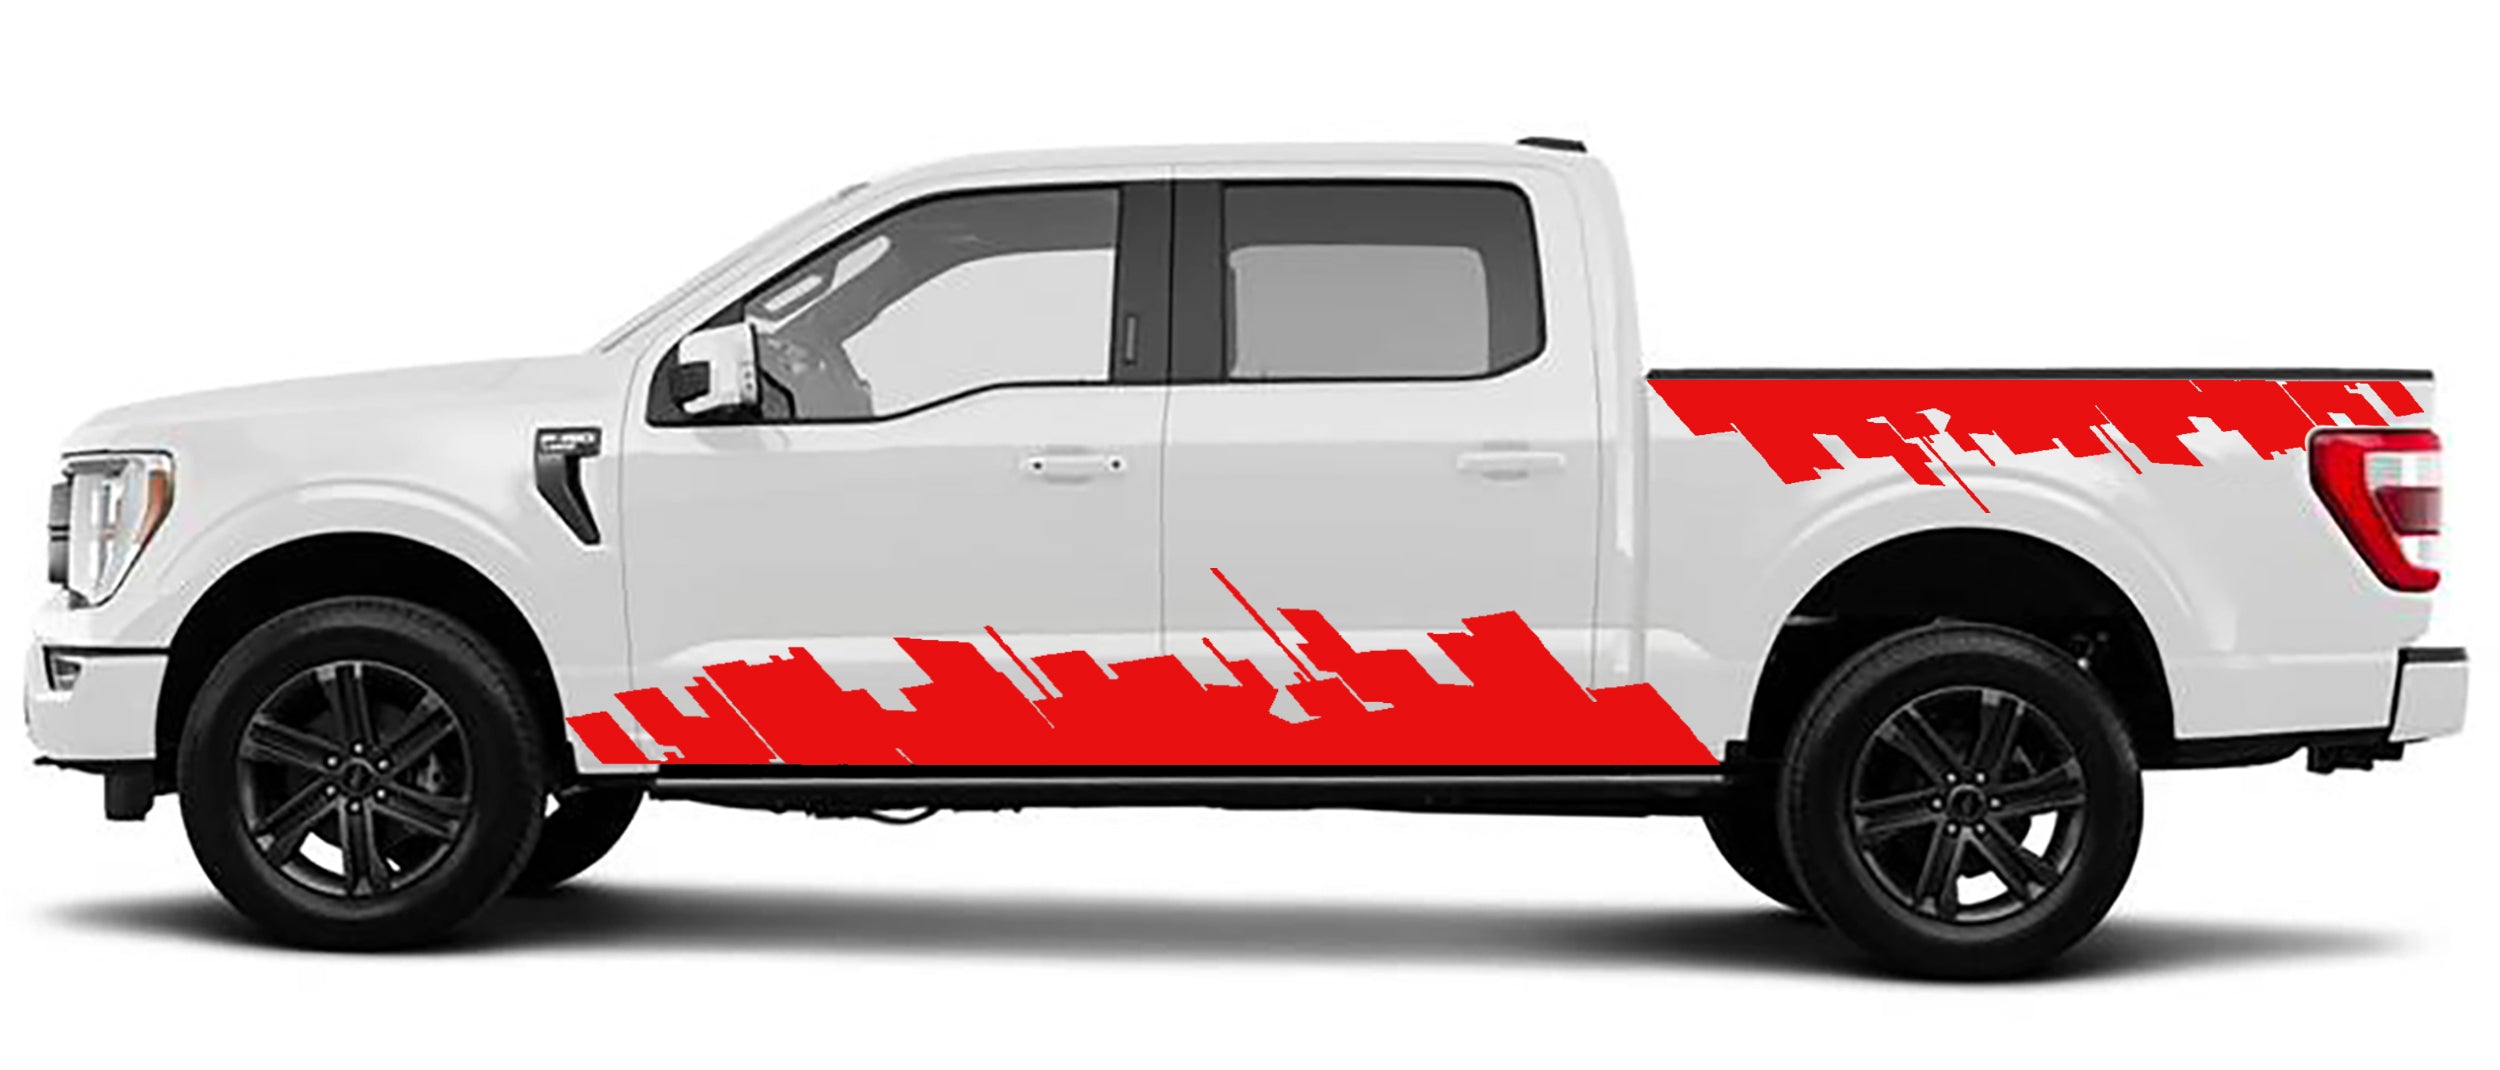 city skyline side graphics for ford f 150 2021 to 2023 models red